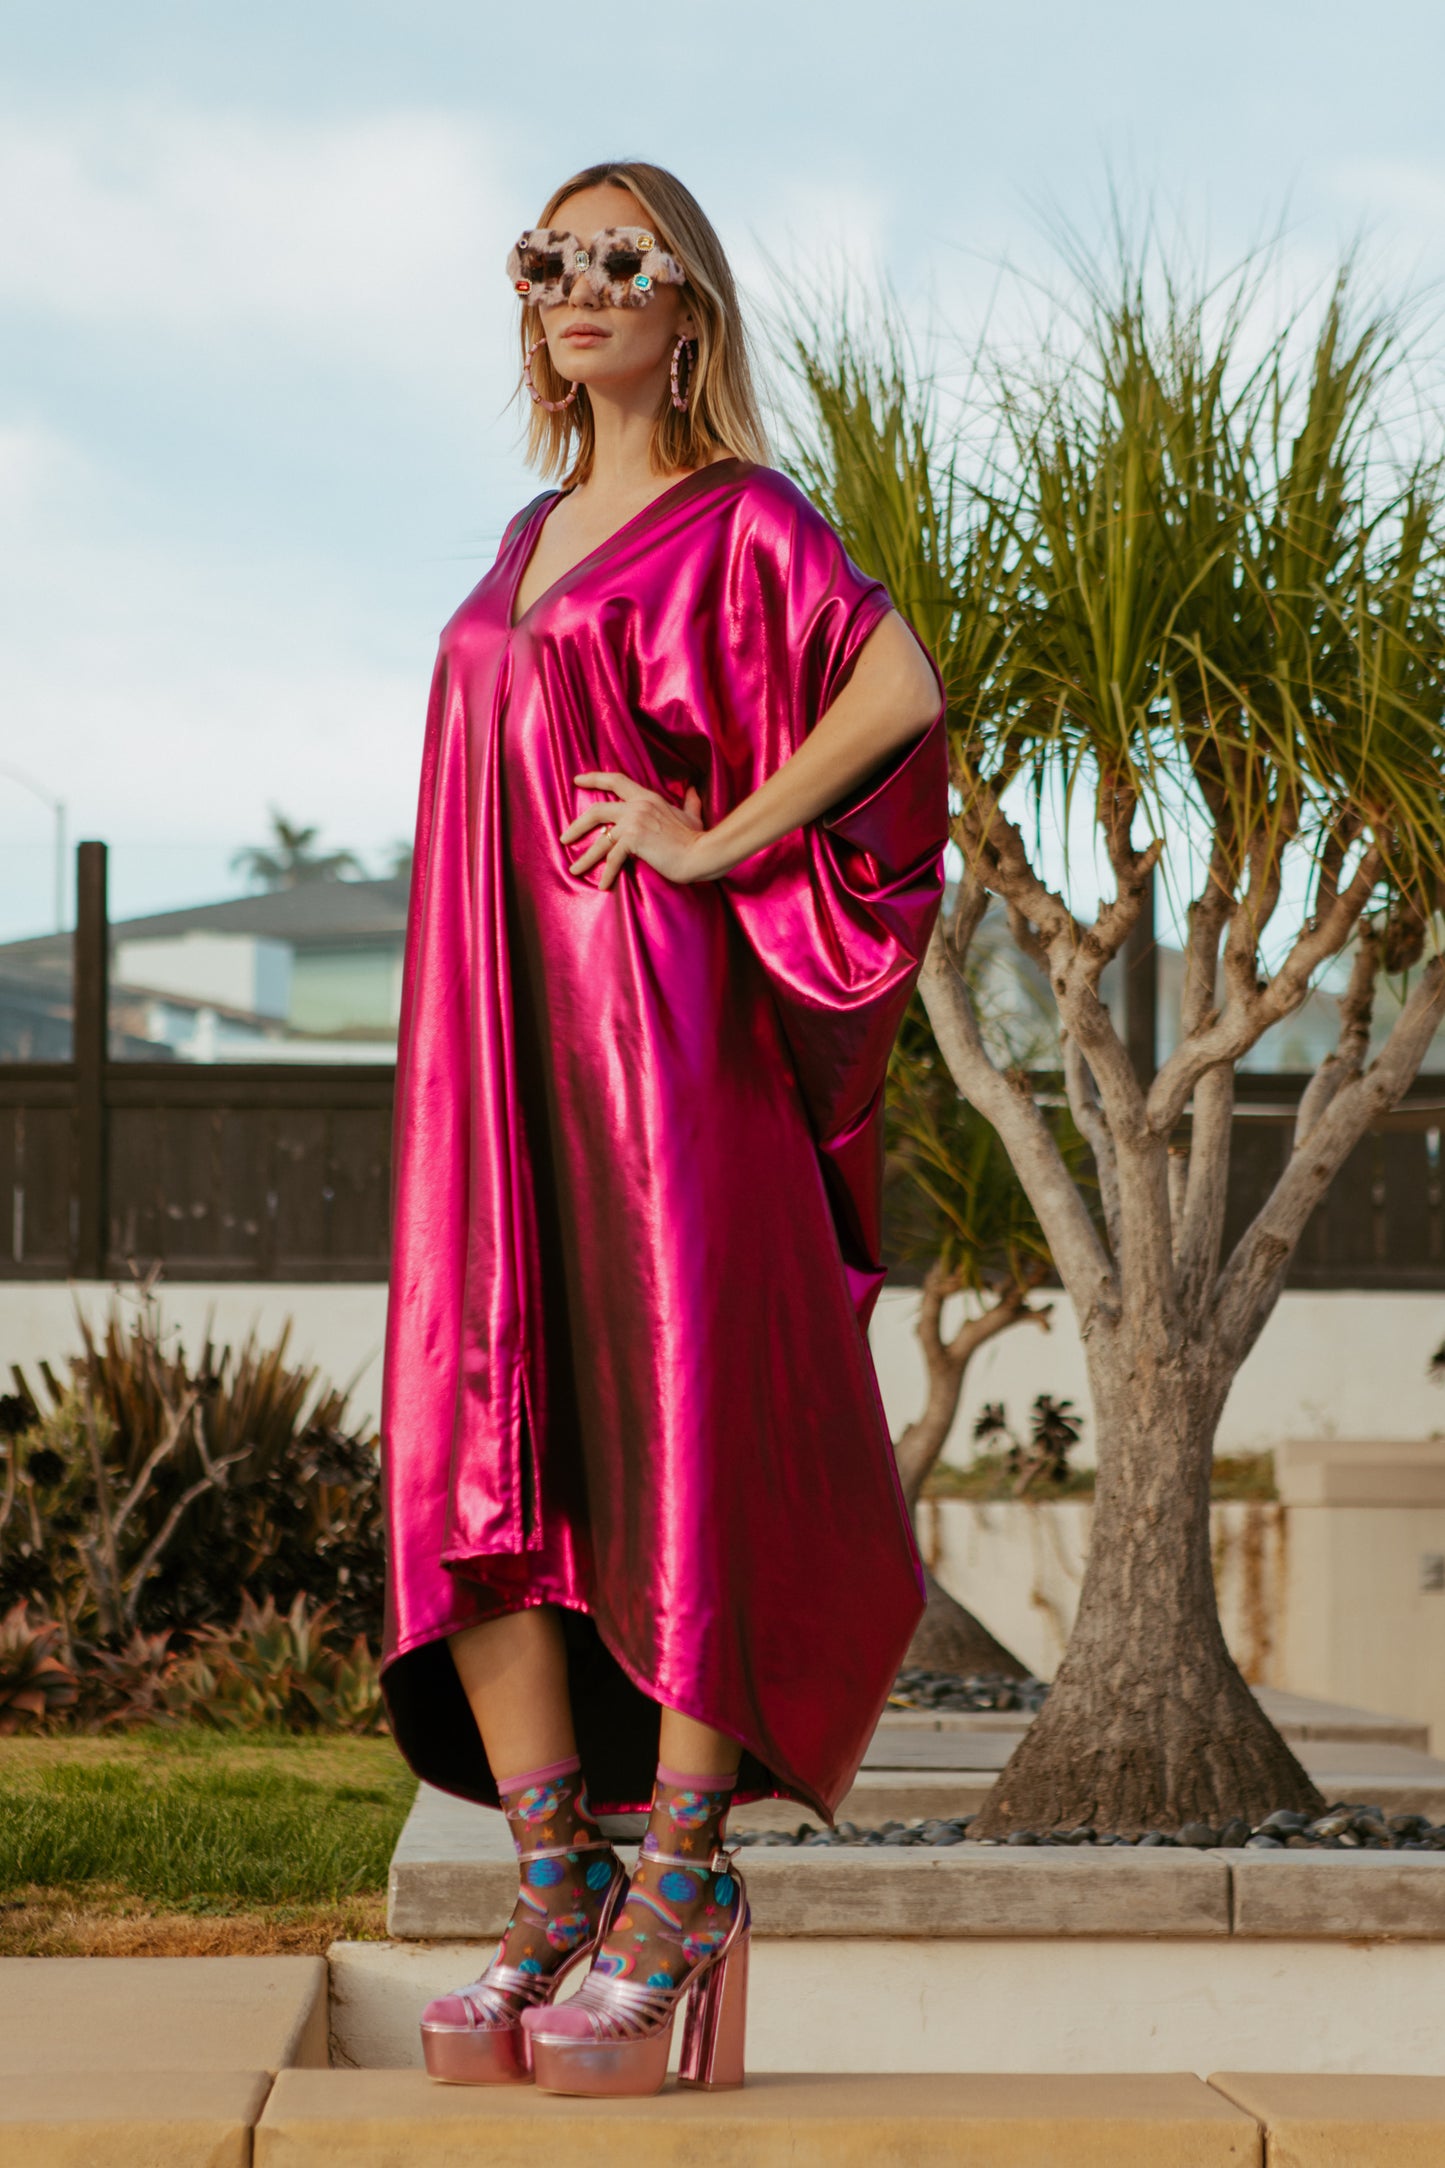 Bold, metallic caftan crafted from a slinky black jersey coated with a deep fuchsia foil that shimmers in the light. The caftan has a generous, free-flowing cut, with ample fabric creating an elegant, loose fit that drapes comfortably over the body, with batwing sleeves and a deep v-neckline.